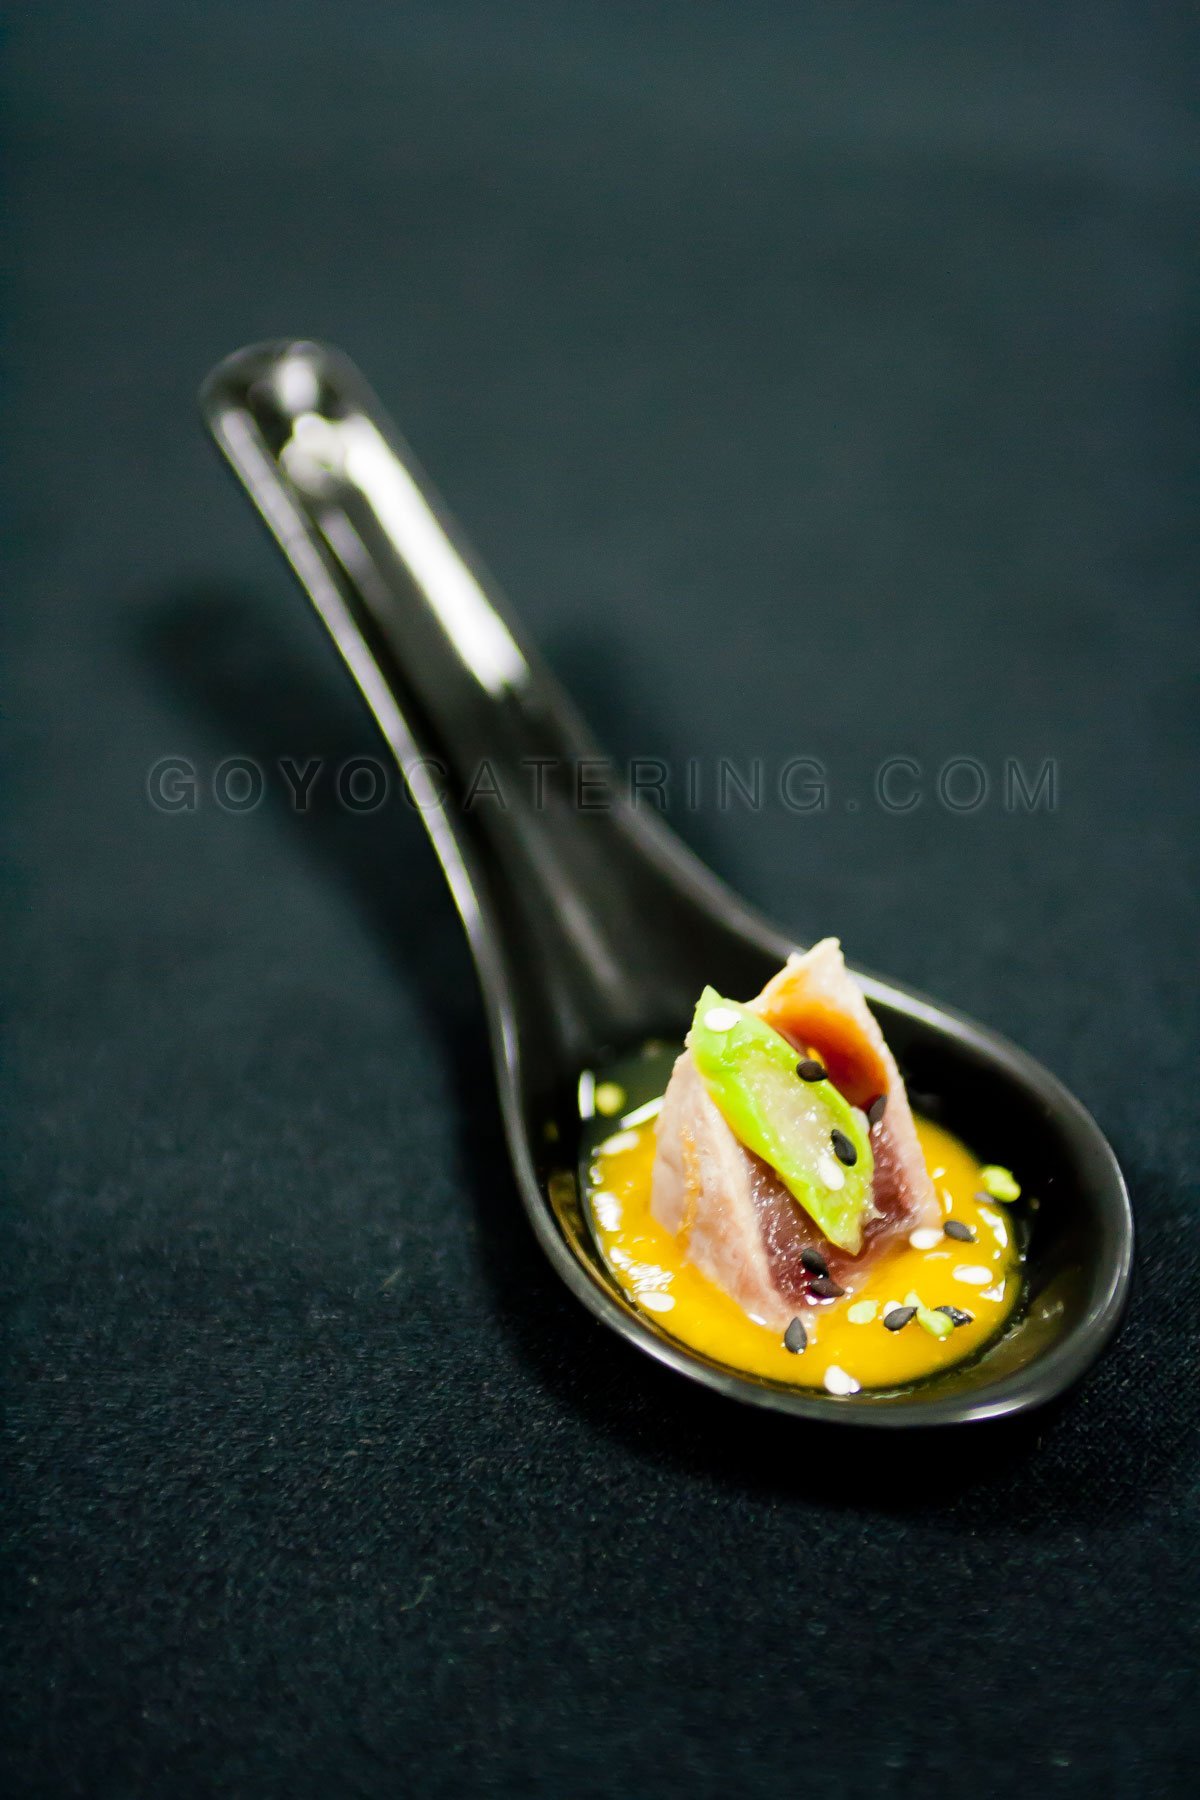 Petite Cuillere of Red Tuna Fish over Mango and Ginger Chutney, Teriyaki Reduction and Sesame Seed Tricolor.